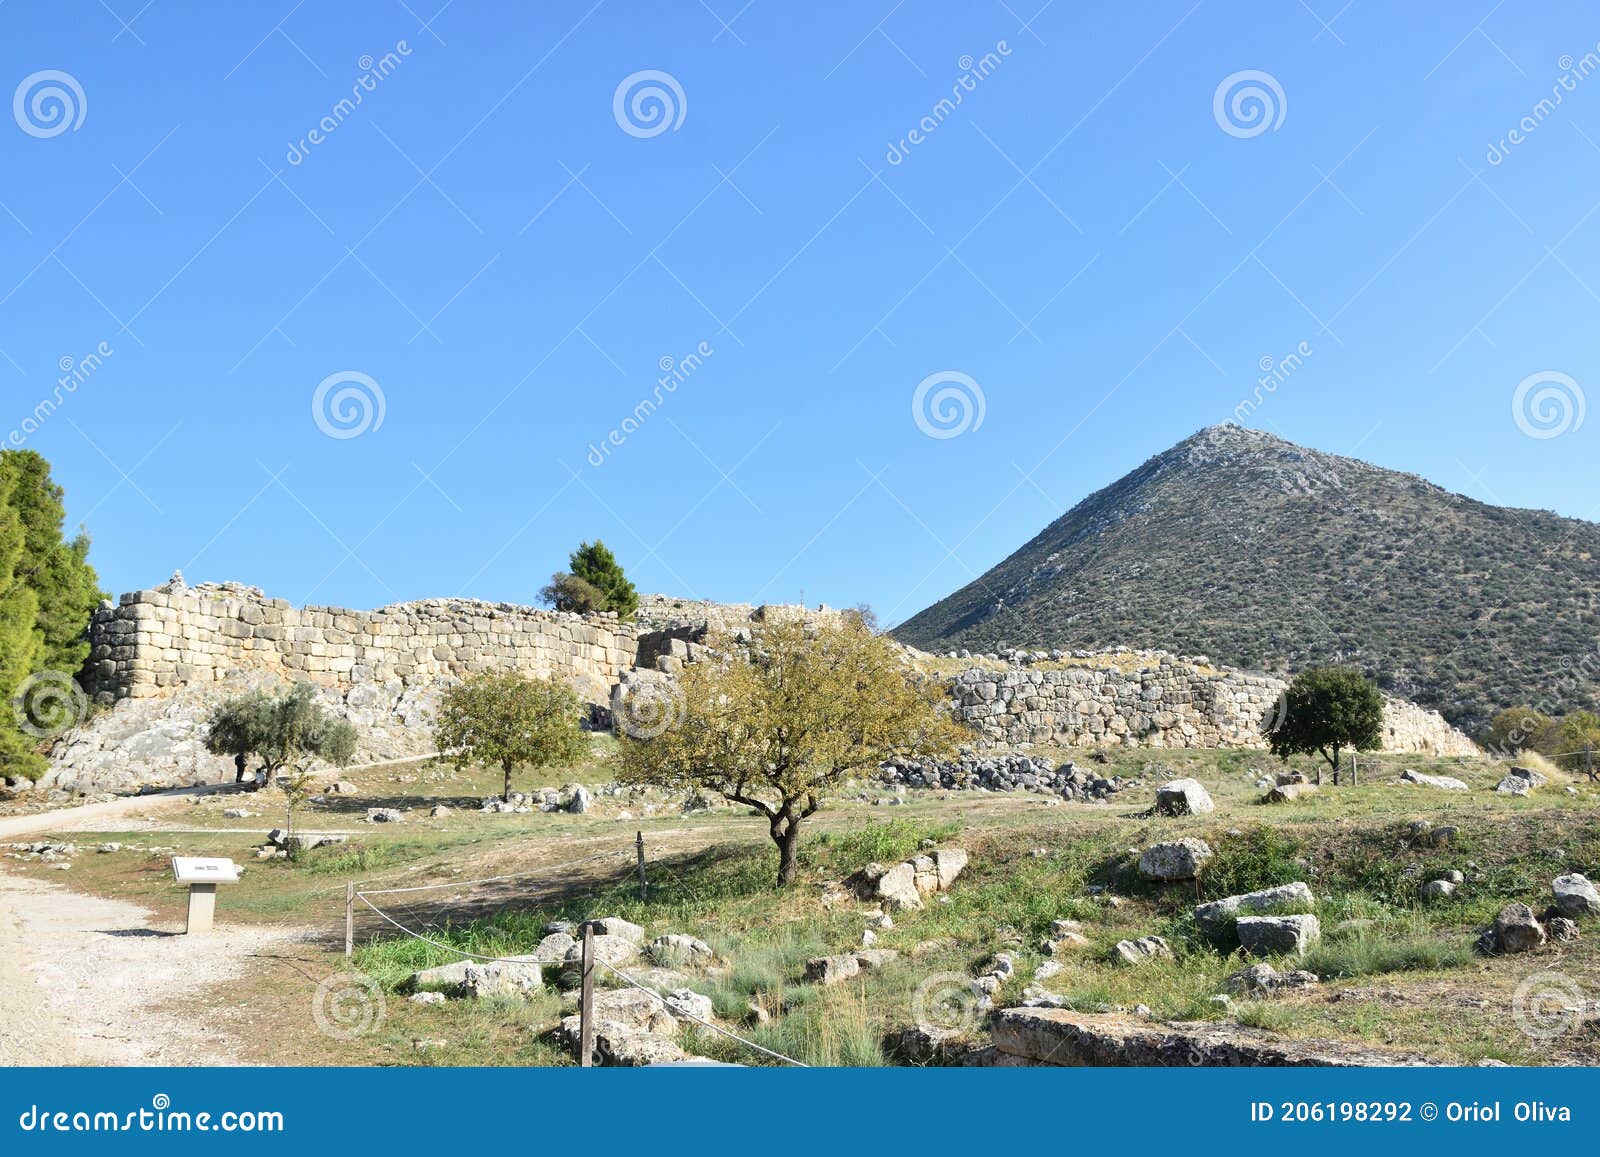 view of the main monuments and sites of athens (greece). mycenae. tombs